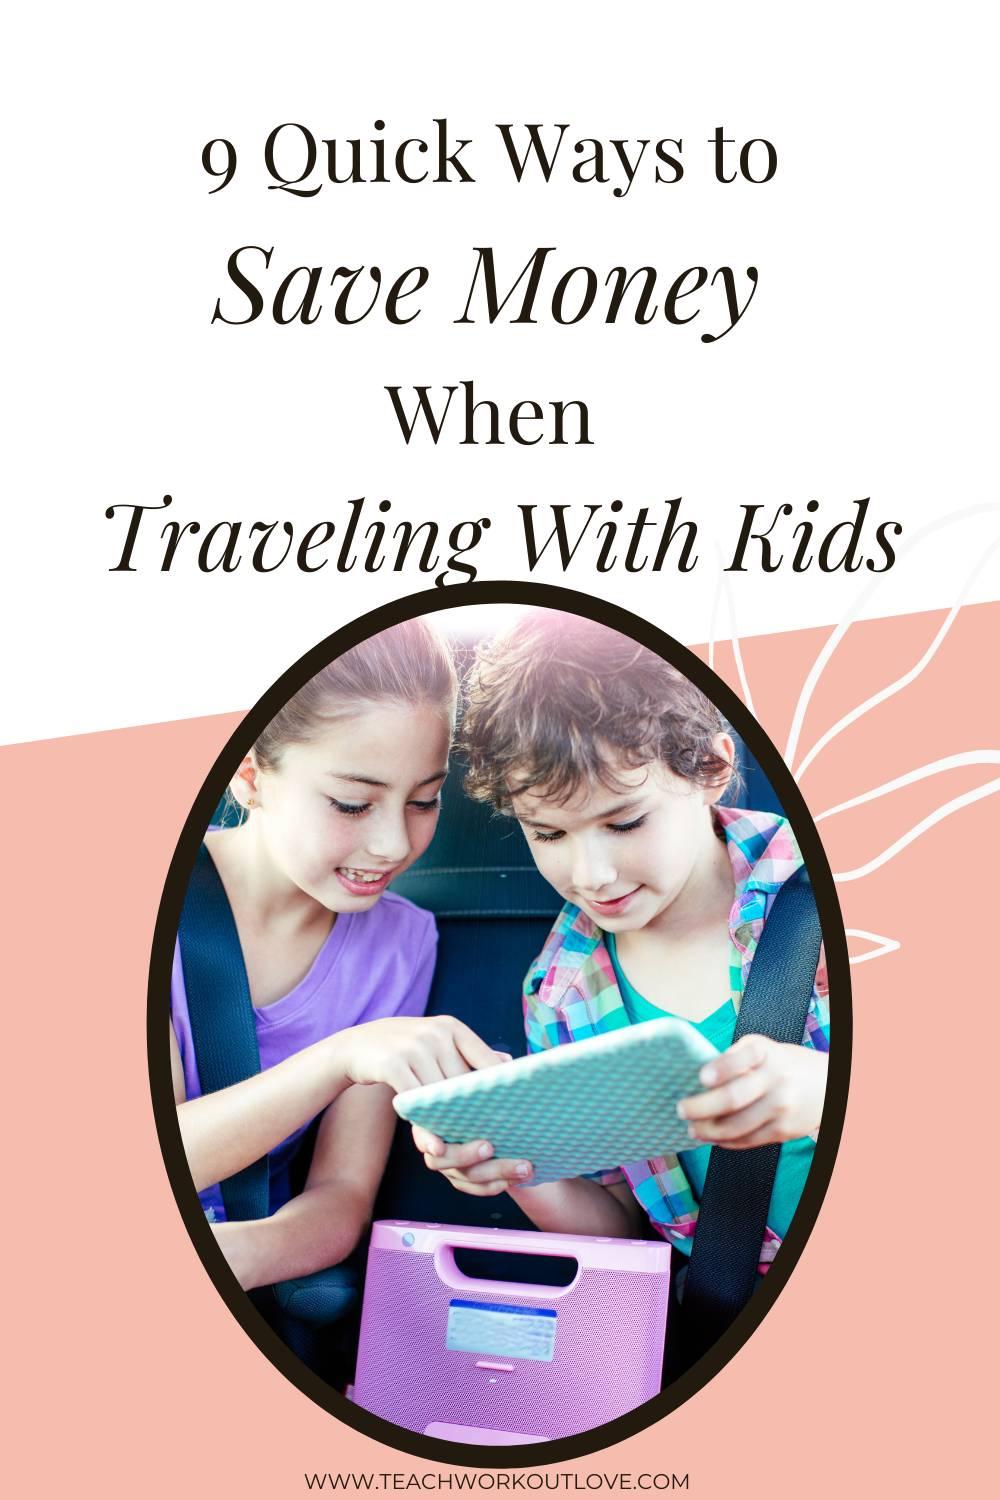 Travel can be expensive, there’s no debating that! Here are a few of our tips for how a family can save money when traveling with kids.